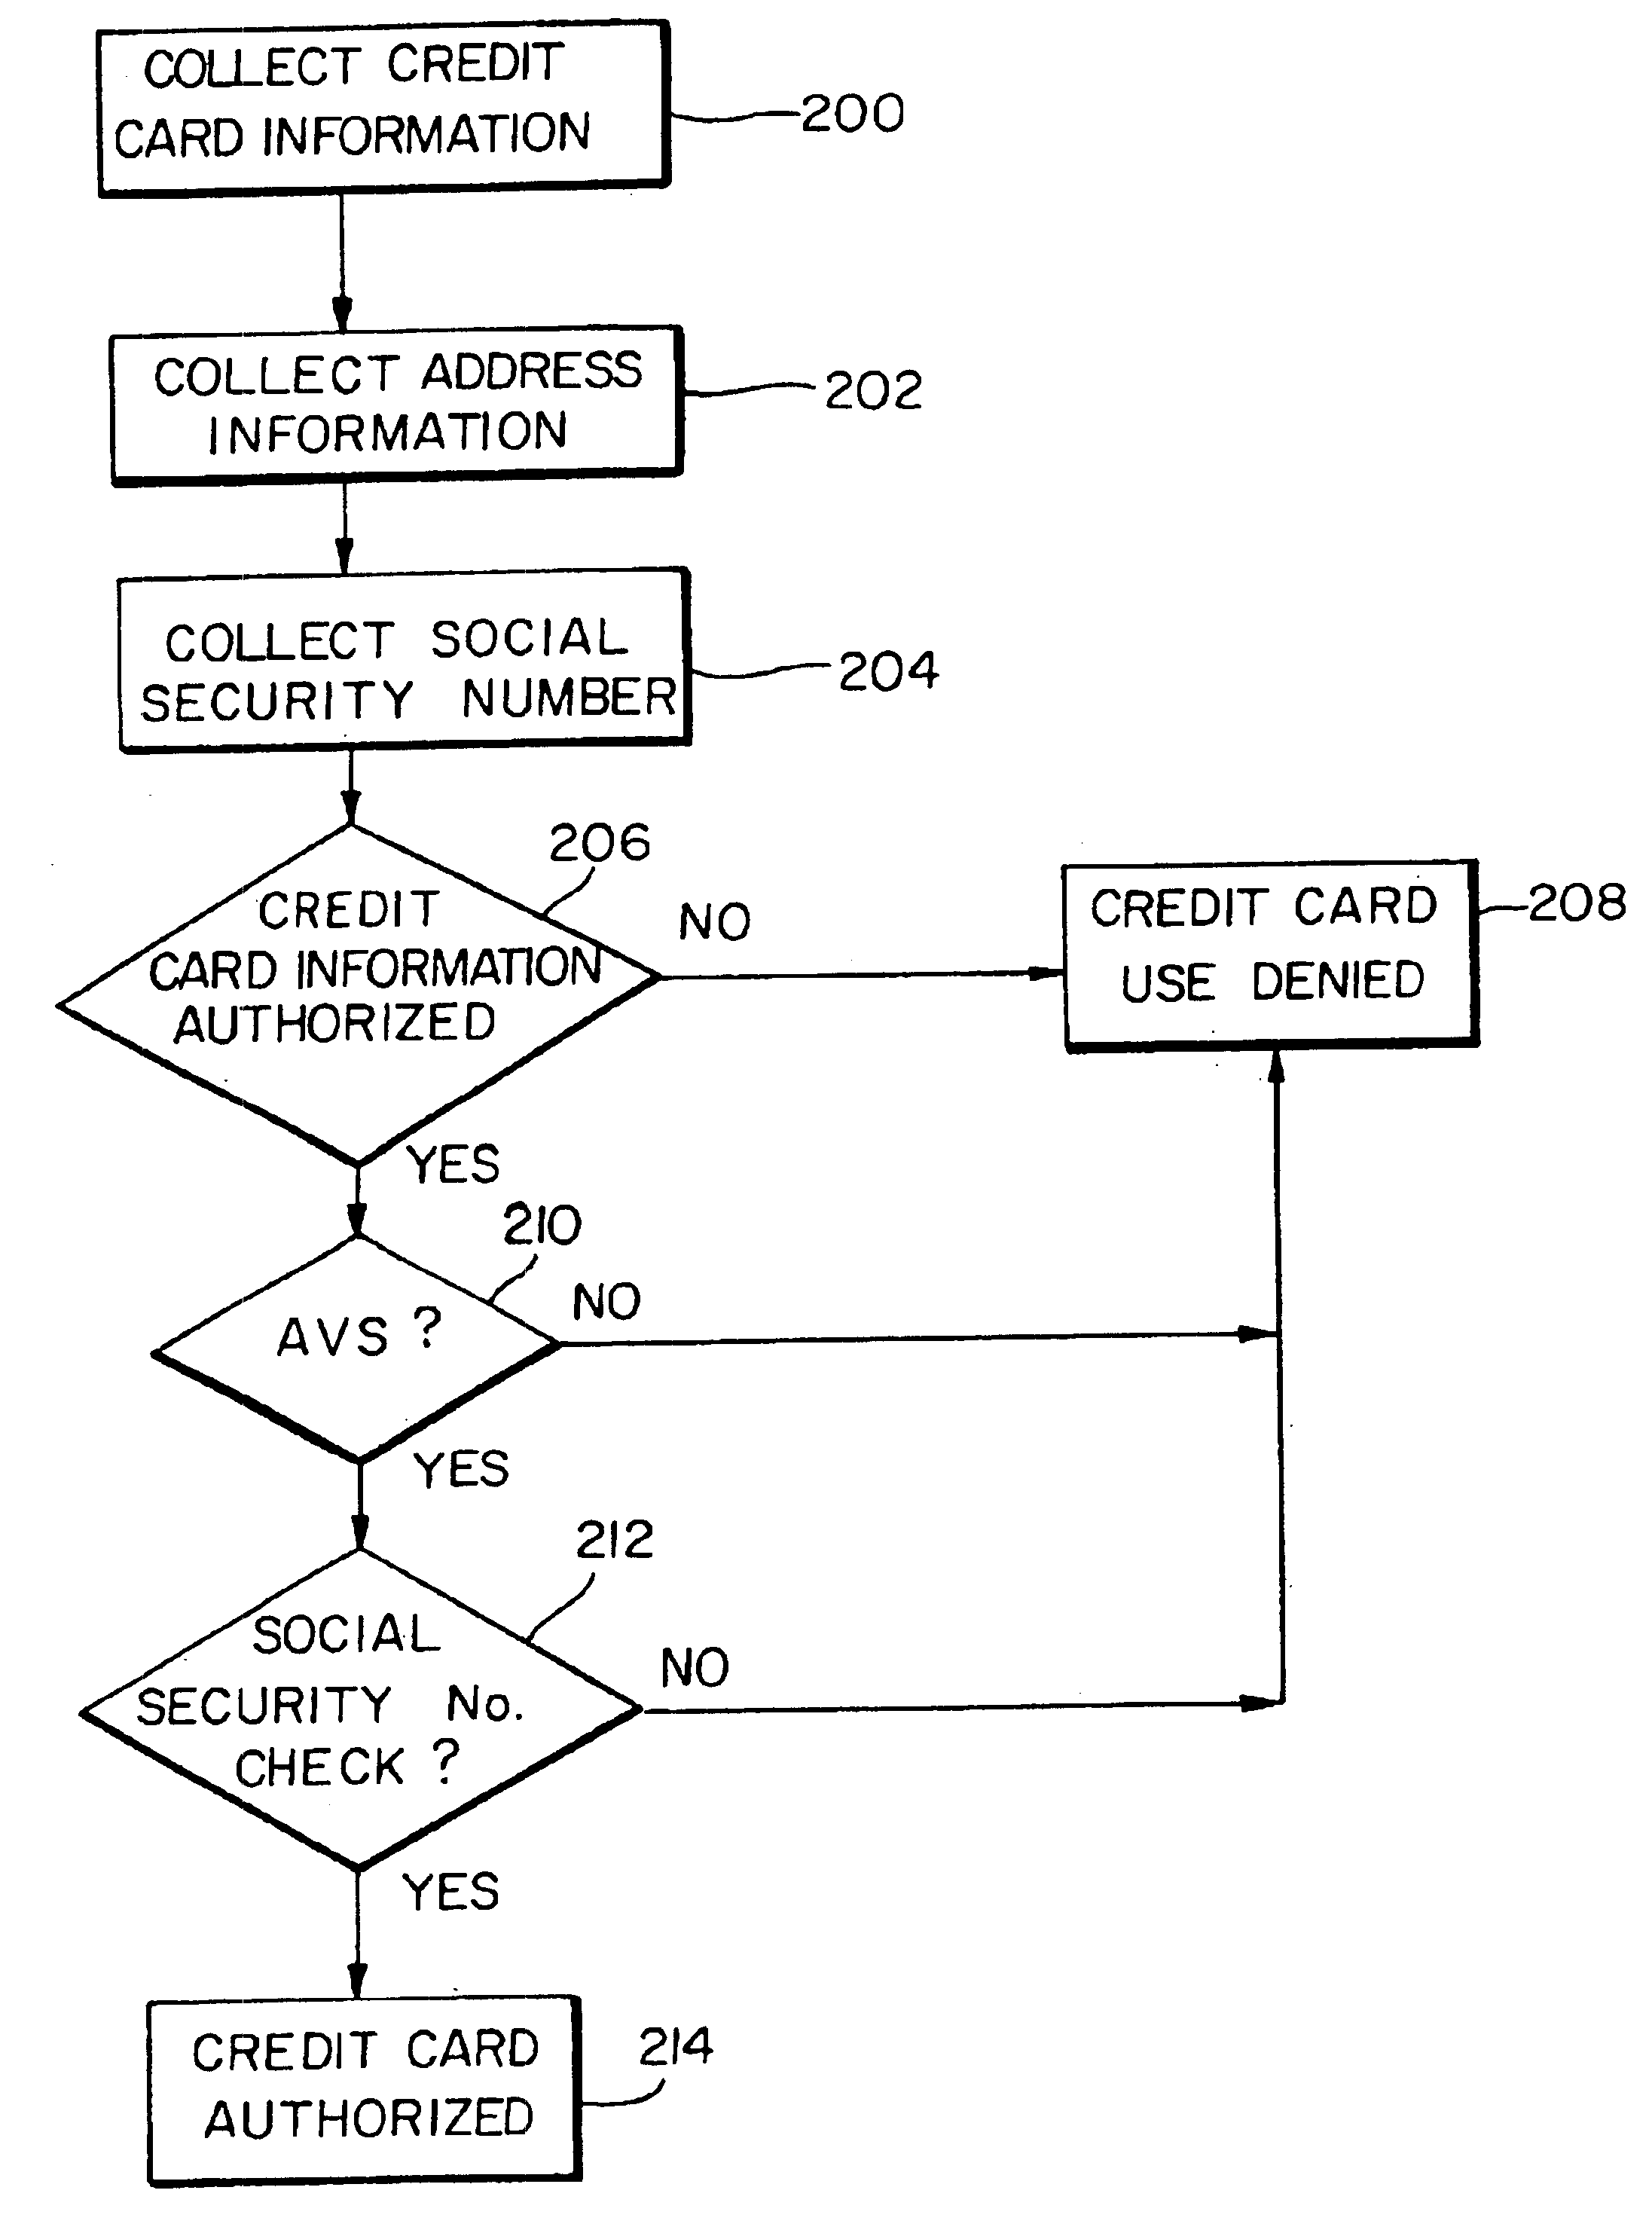 System and method for enhanced fraud detection in automated electronic credit card processing